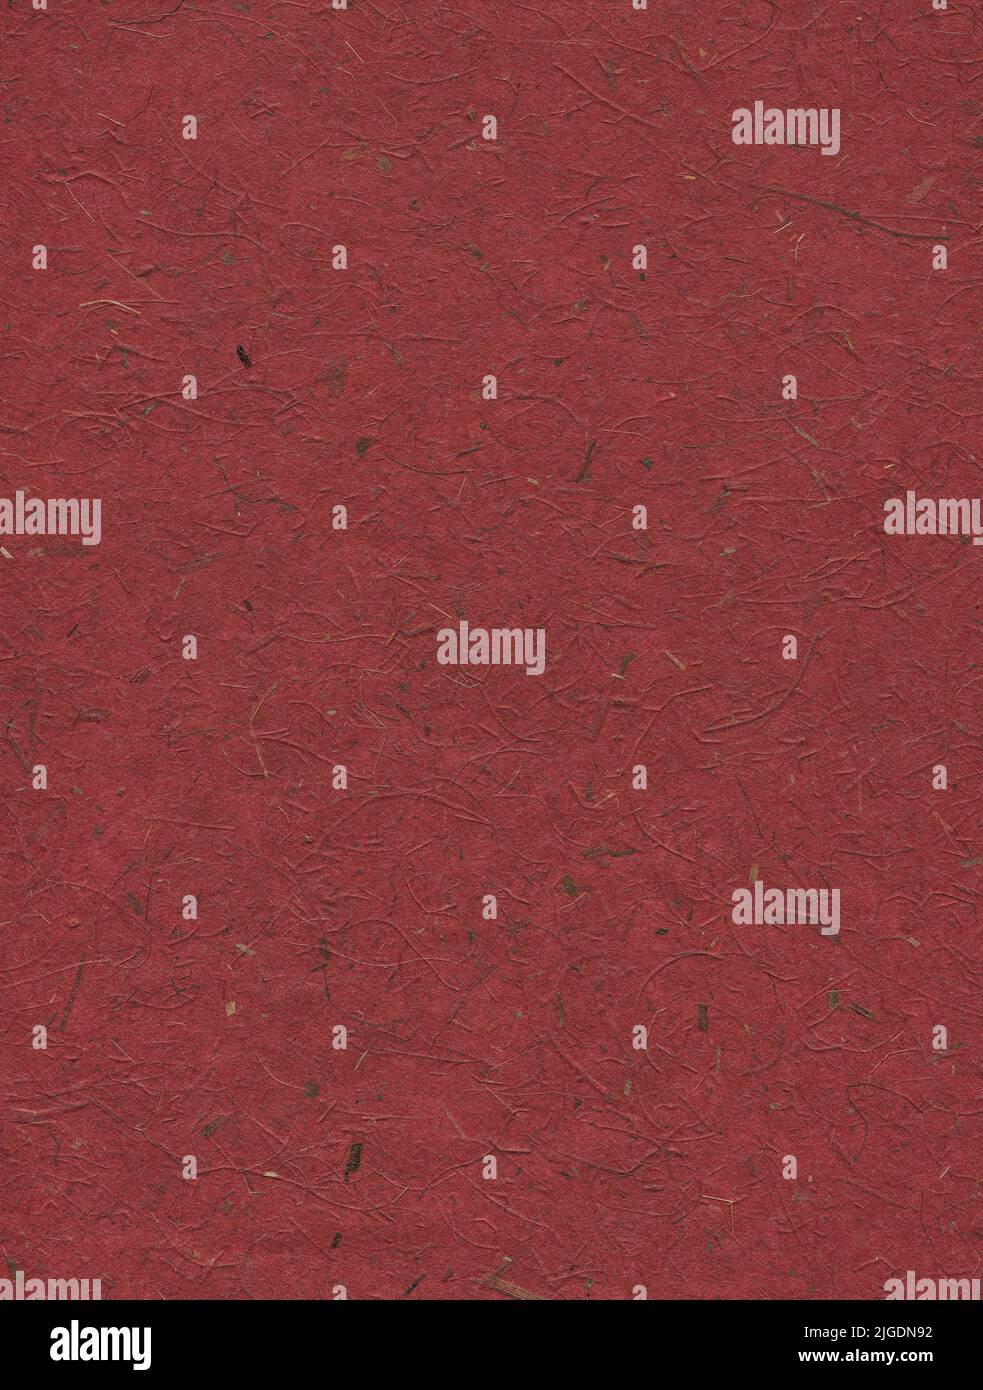 Red paper background with pattern Stock Photo